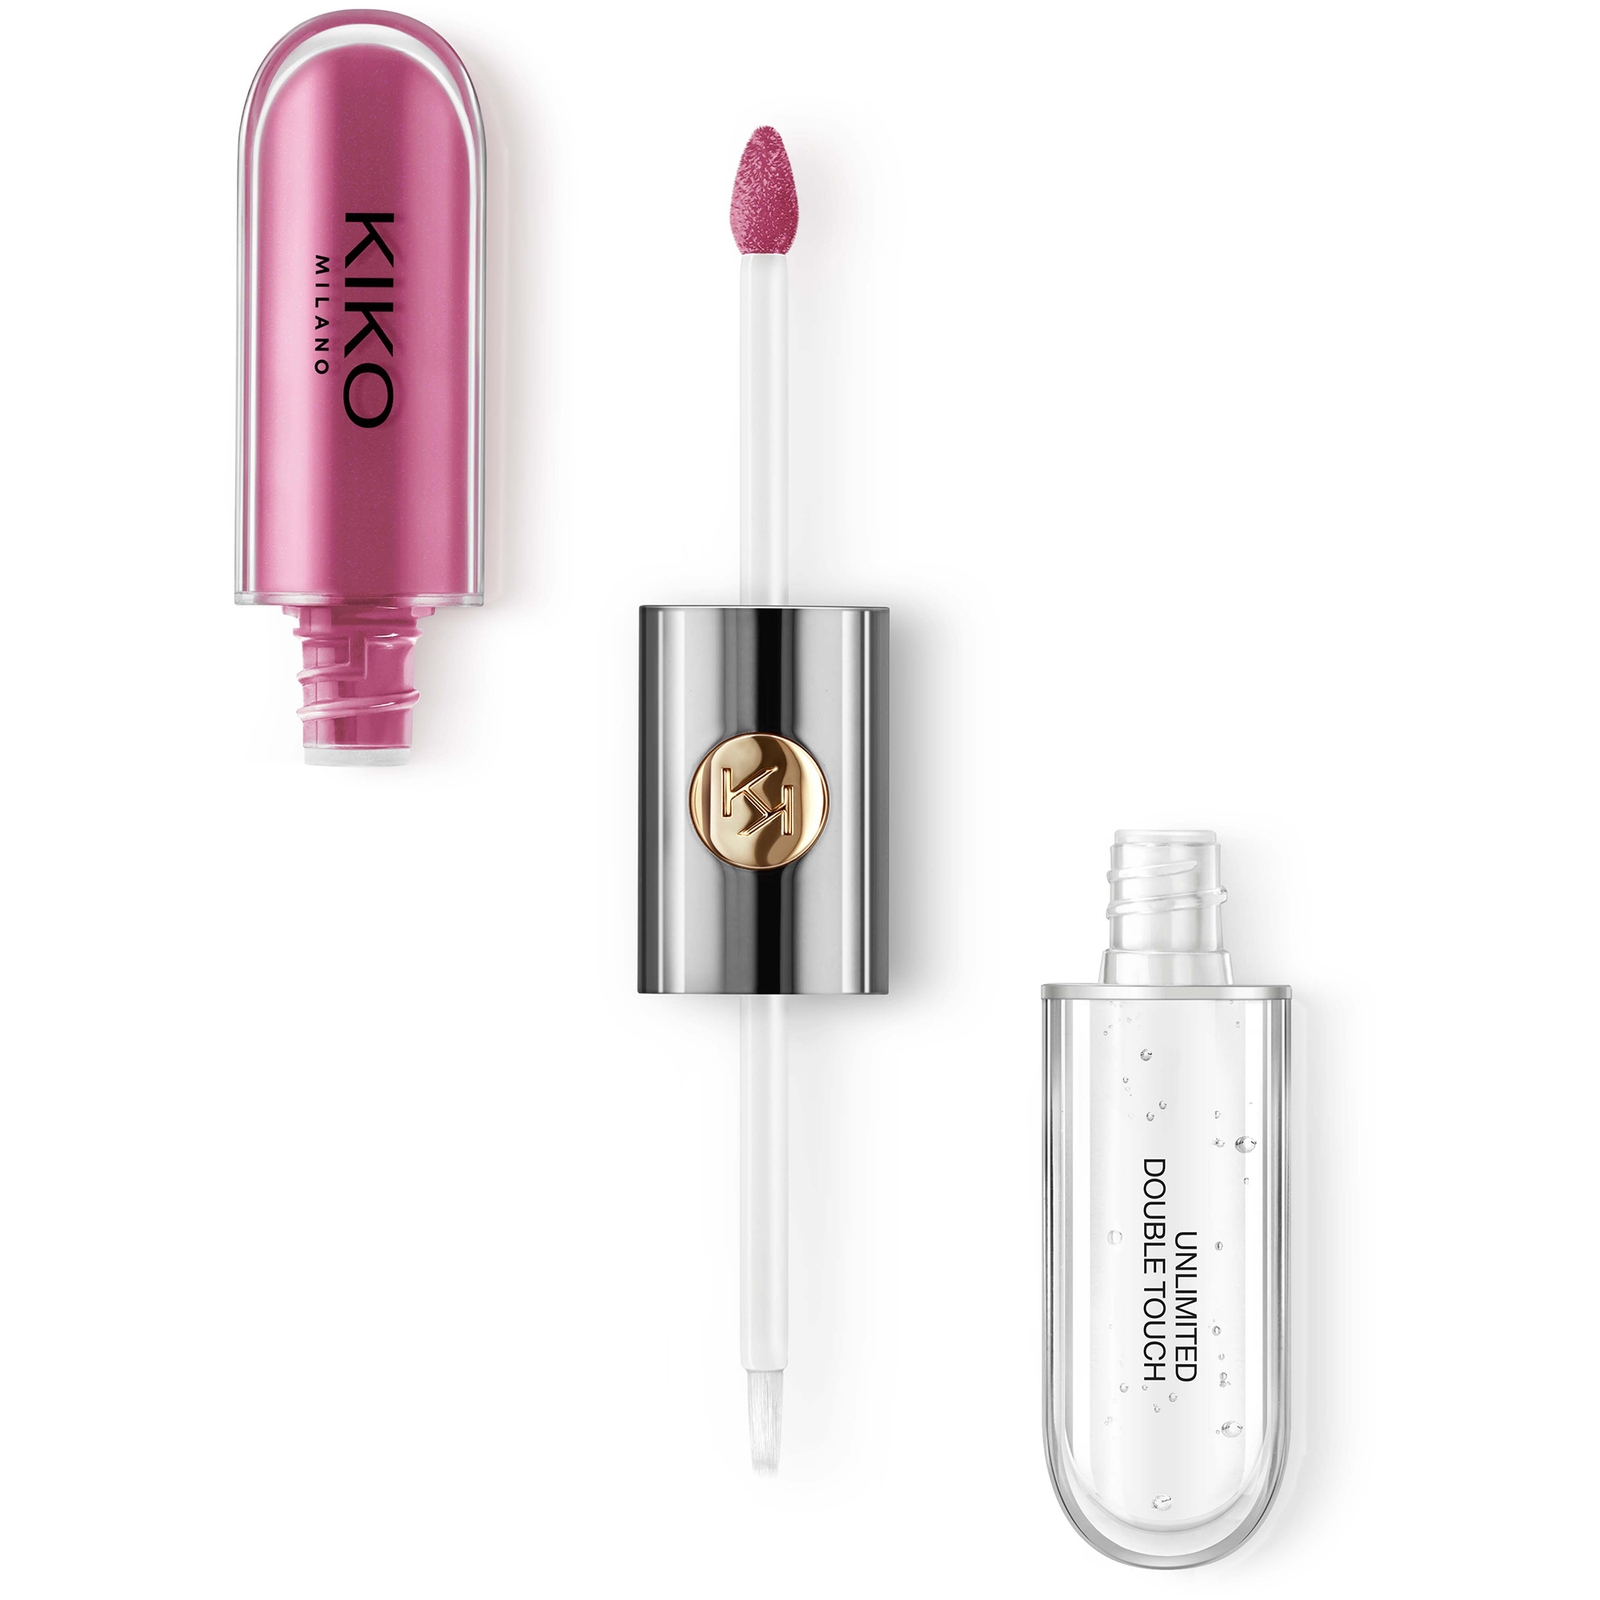 KIKO Milano Unlimited Double Touch 6ml (Various Shades) - 118 Orchid